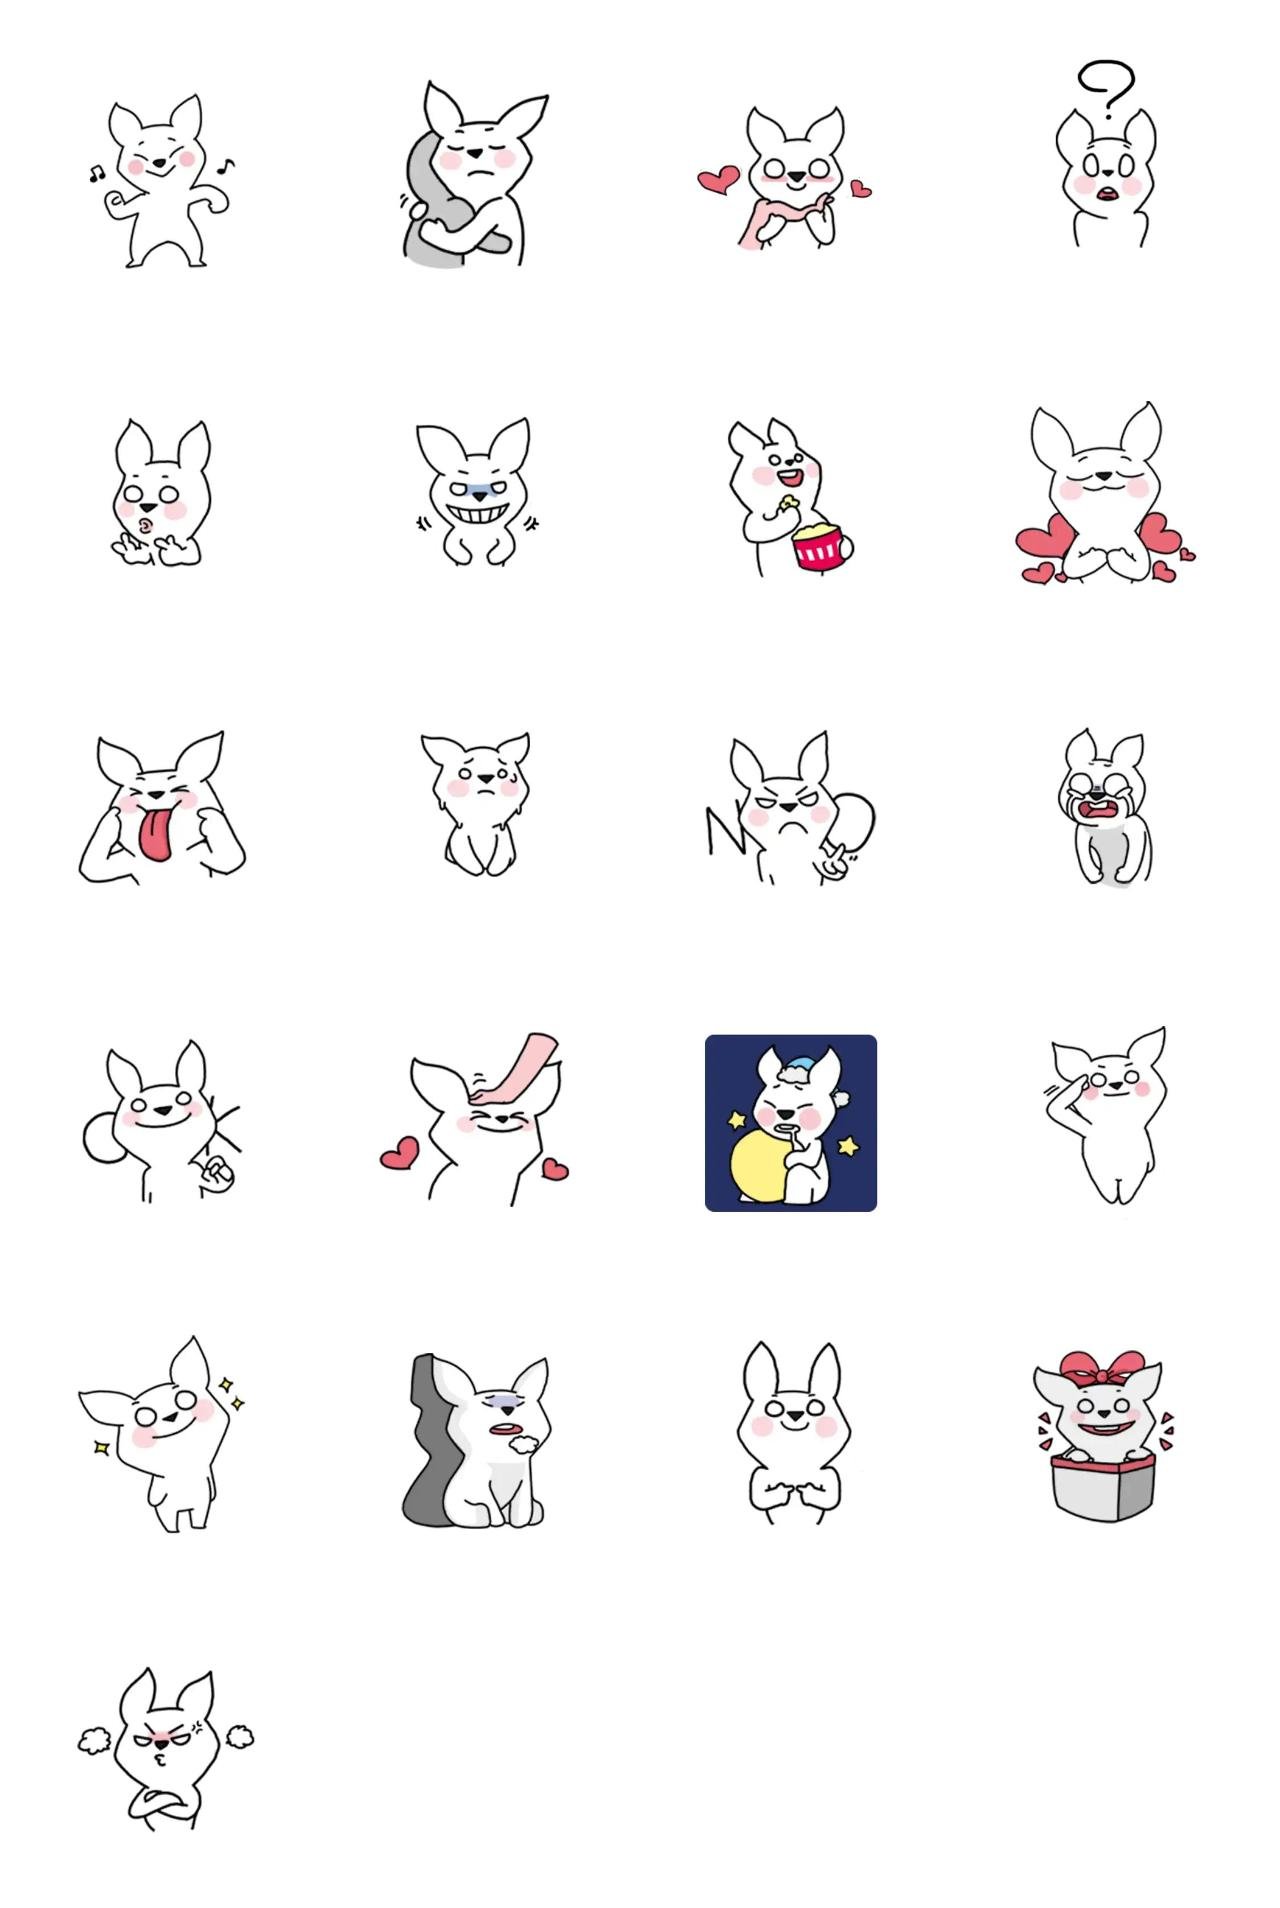 I want to talk about rabbits with big ears Animals sticker pack for Whatsapp, Telegram, Signal, and others chatting and message apps